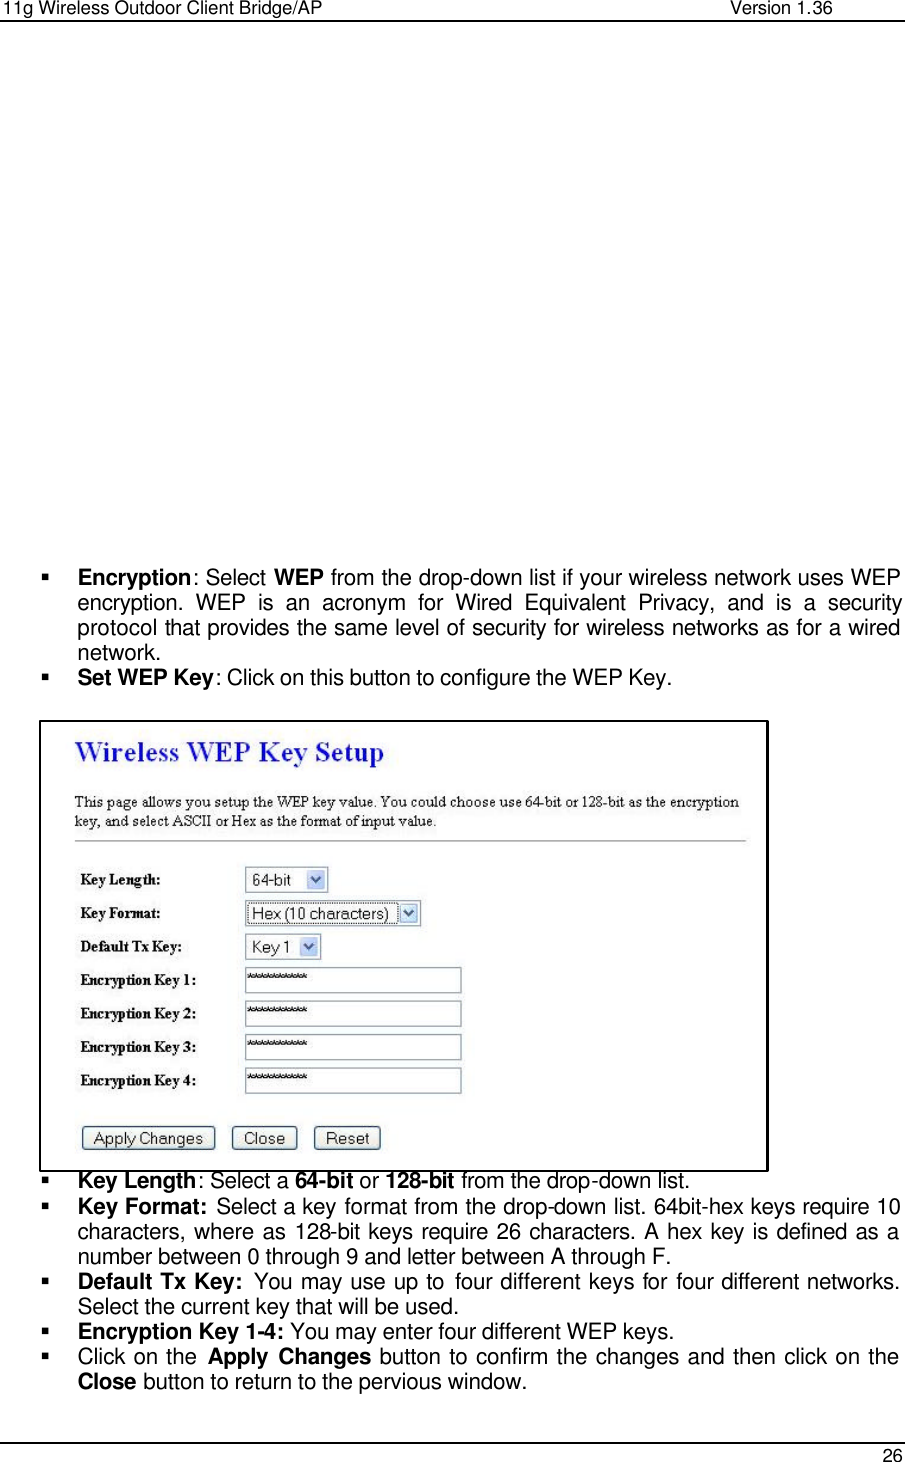 11g Wireless Outdoor Client Bridge/AP                Version 1.36    26                    § Encryption: Select WEP from the drop-down list if your wireless network uses WEP encryption. WEP is an acronym for Wired Equivalent Privacy, and is a security protocol that provides the same level of security for wireless networks as for a wired network.  § Set WEP Key: Click on this button to configure the WEP Key.                    § Key Length: Select a 64-bit or 128-bit from the drop-down list.  § Key Format: Select a key format from the drop-down list. 64bit-hex keys require 10 characters, where as 128-bit keys require 26 characters. A hex key is defined as a number between 0 through 9 and letter between A through F. § Default Tx Key:  You may use up to four different keys for four different networks. Select the current key that will be used.  § Encryption Key 1-4: You may enter four different WEP keys.  § Click on the Apply Changes button to confirm the changes and then click on the Close button to return to the pervious window.    